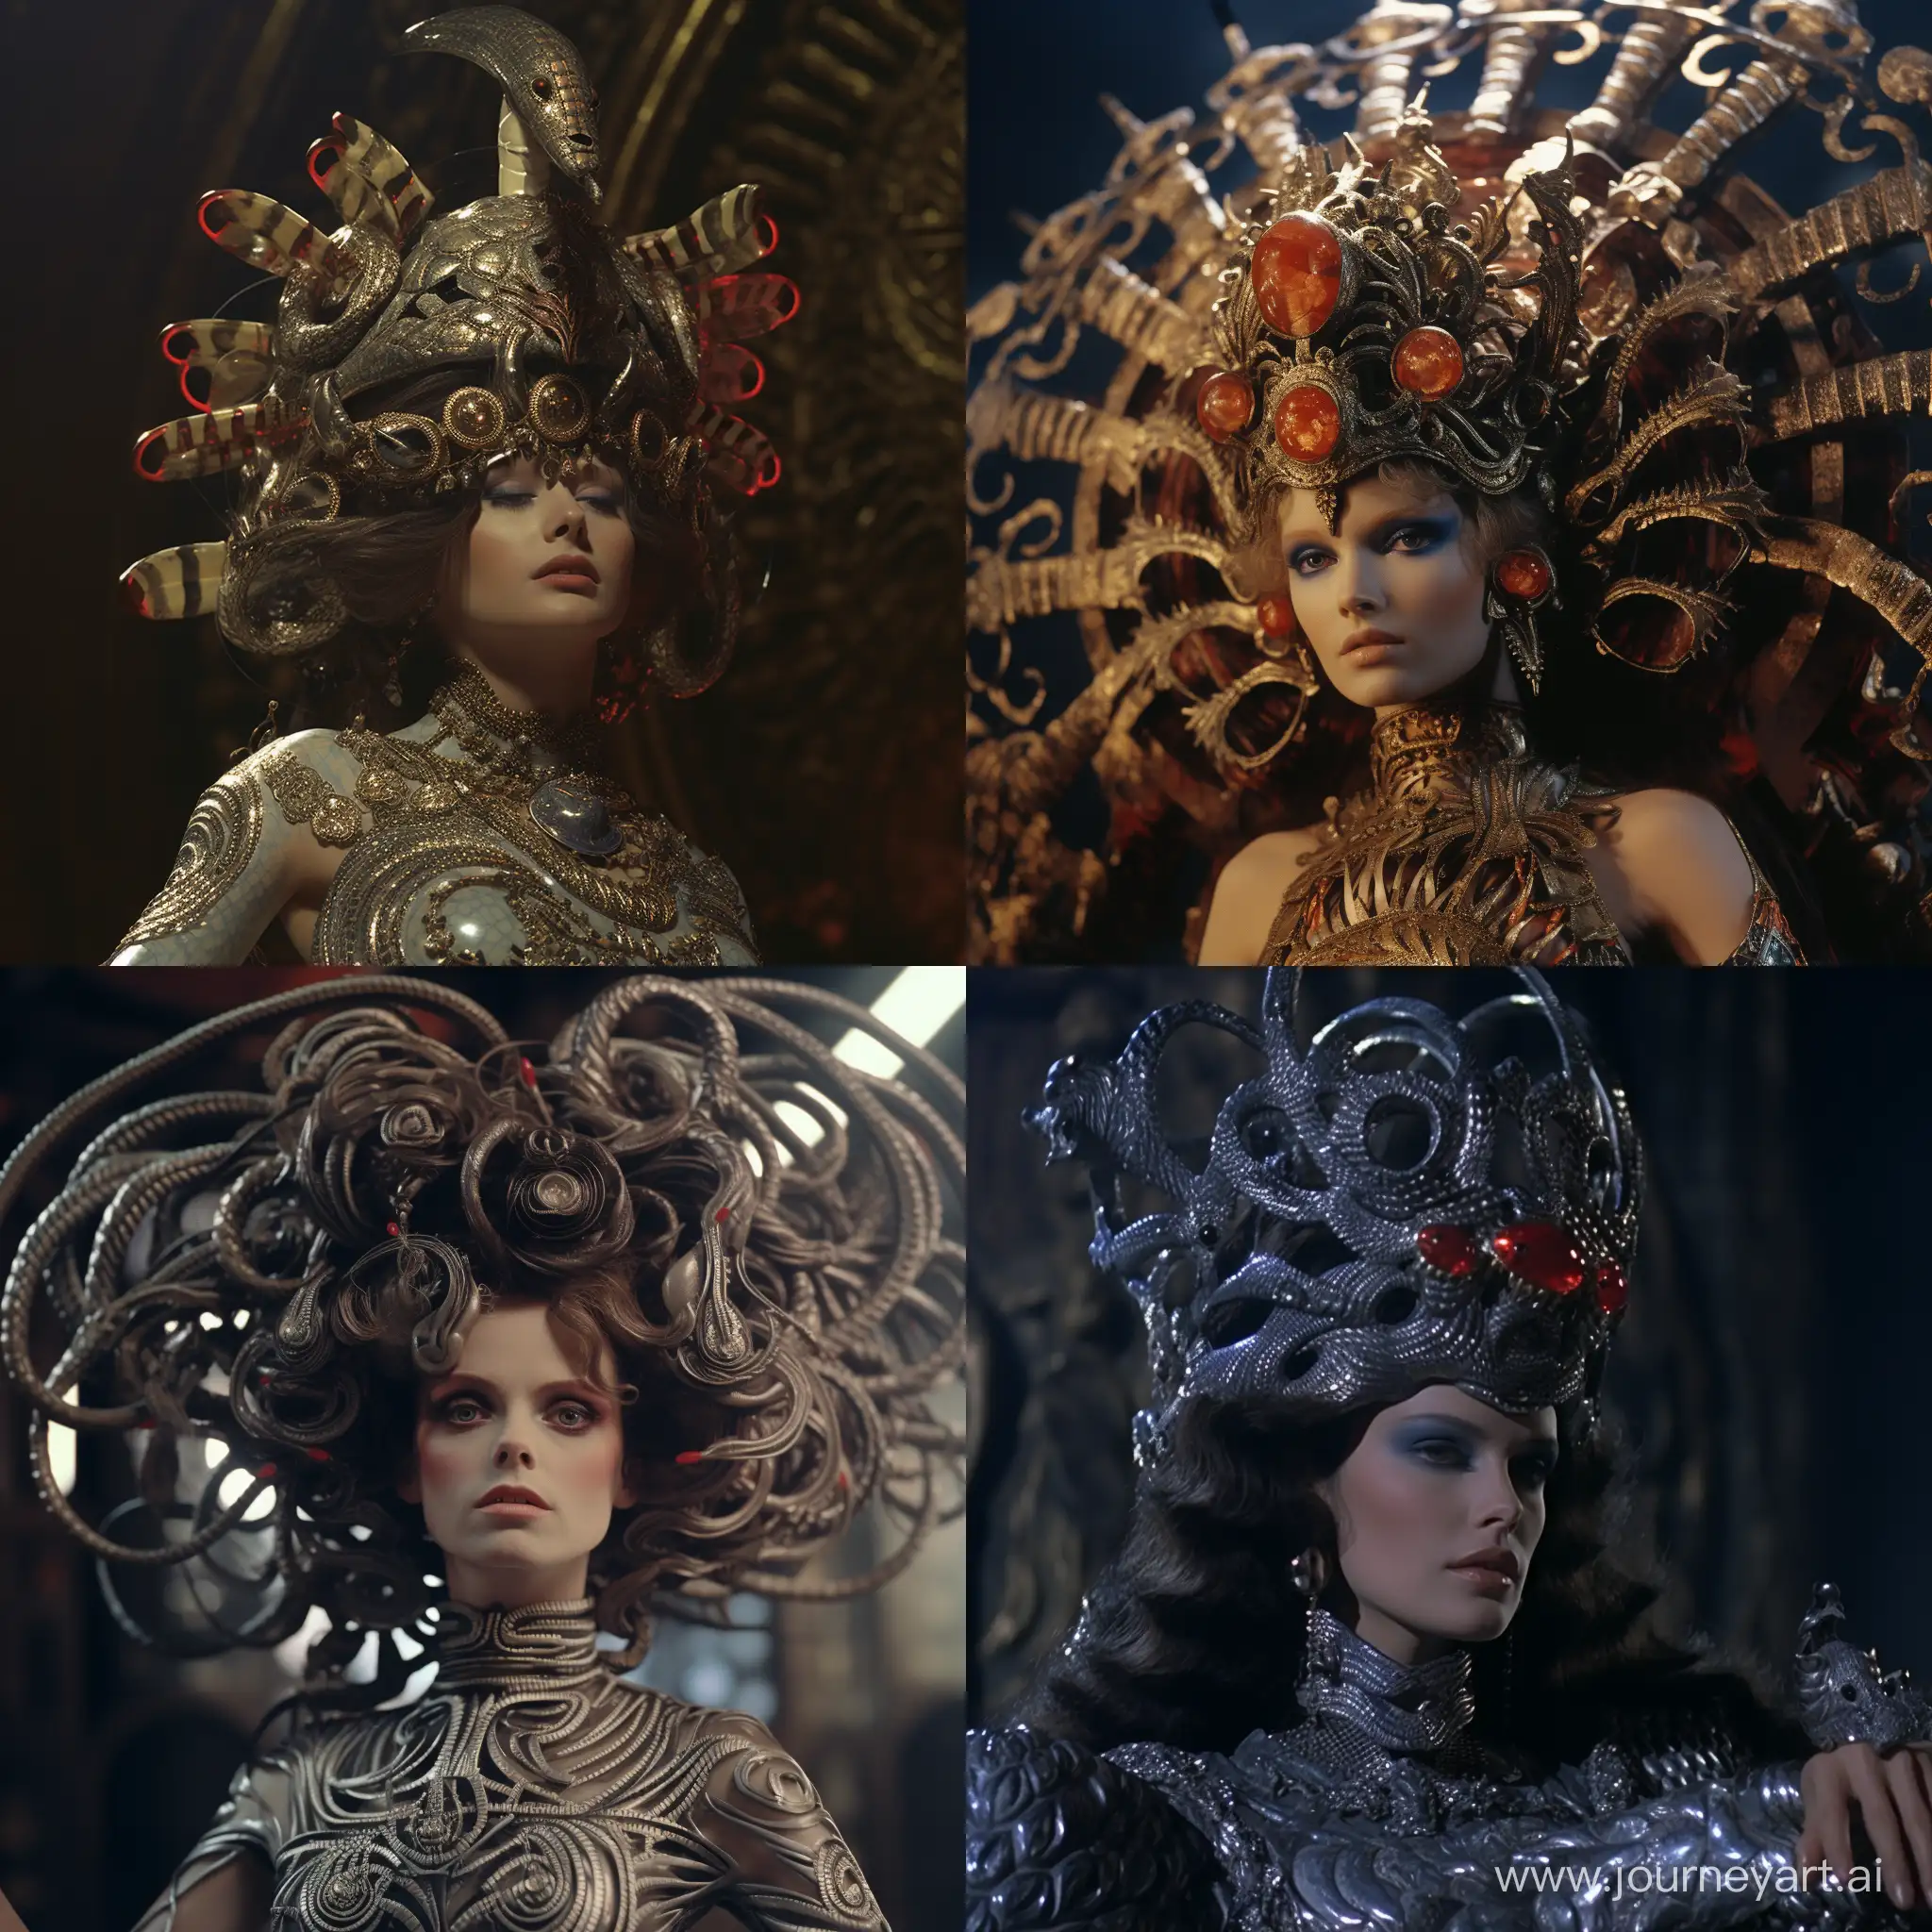 dvd screenengrabs arx fatalis anthropomorphic snake with a woman's face and spiral hair with a crown dark fantasy 1980 style